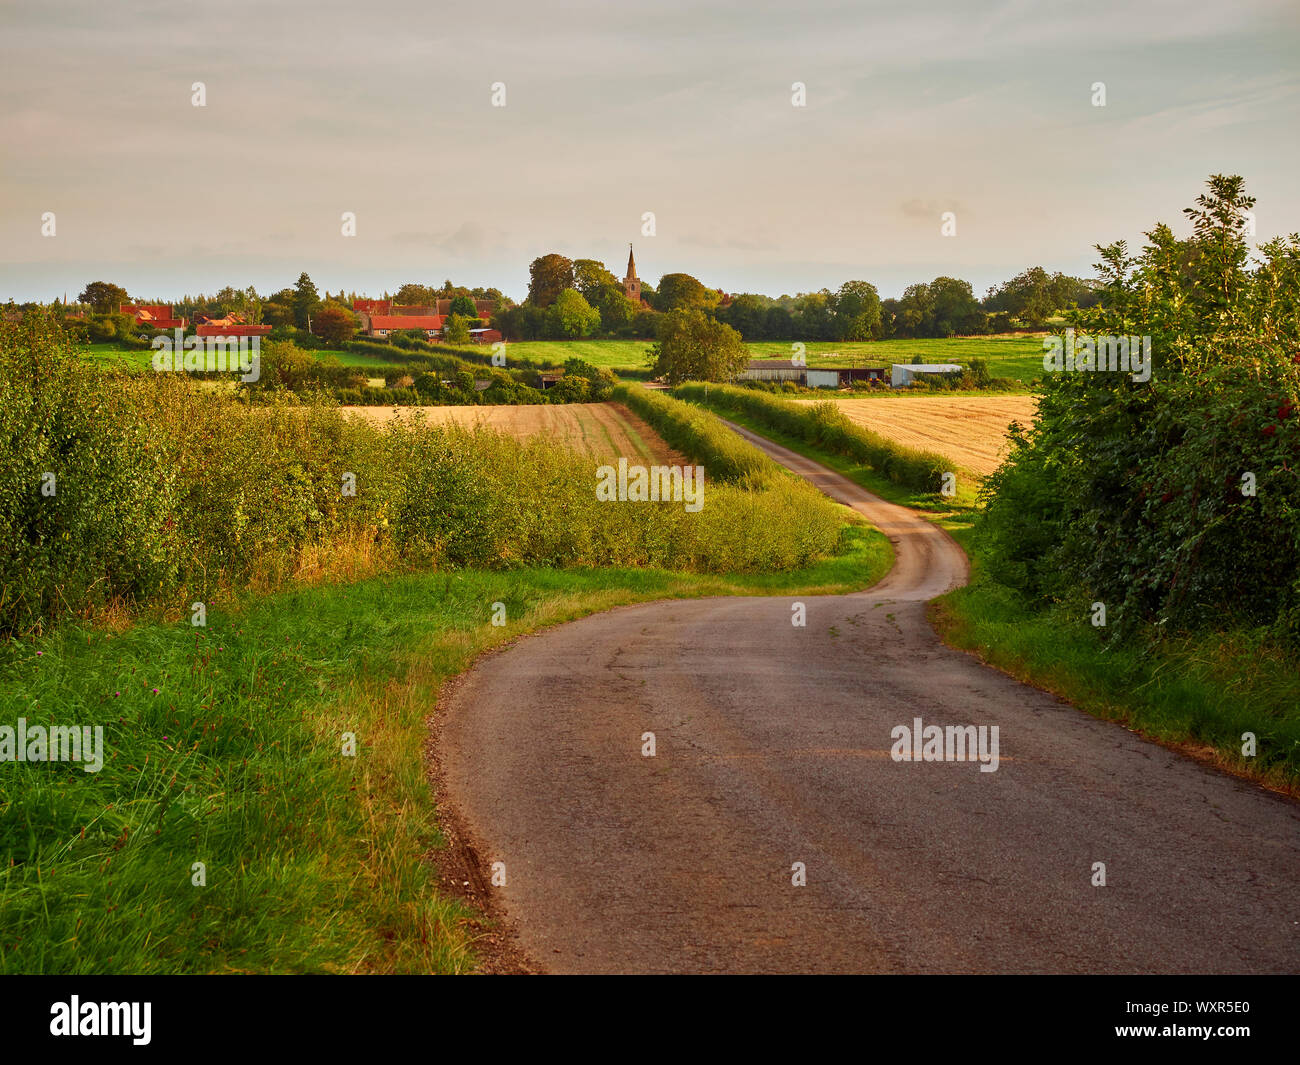 A view across the rural countryside landscape looking towards Kelby, Lincolnshire, illuminated by the warm glow of the evening sun Stock Photo